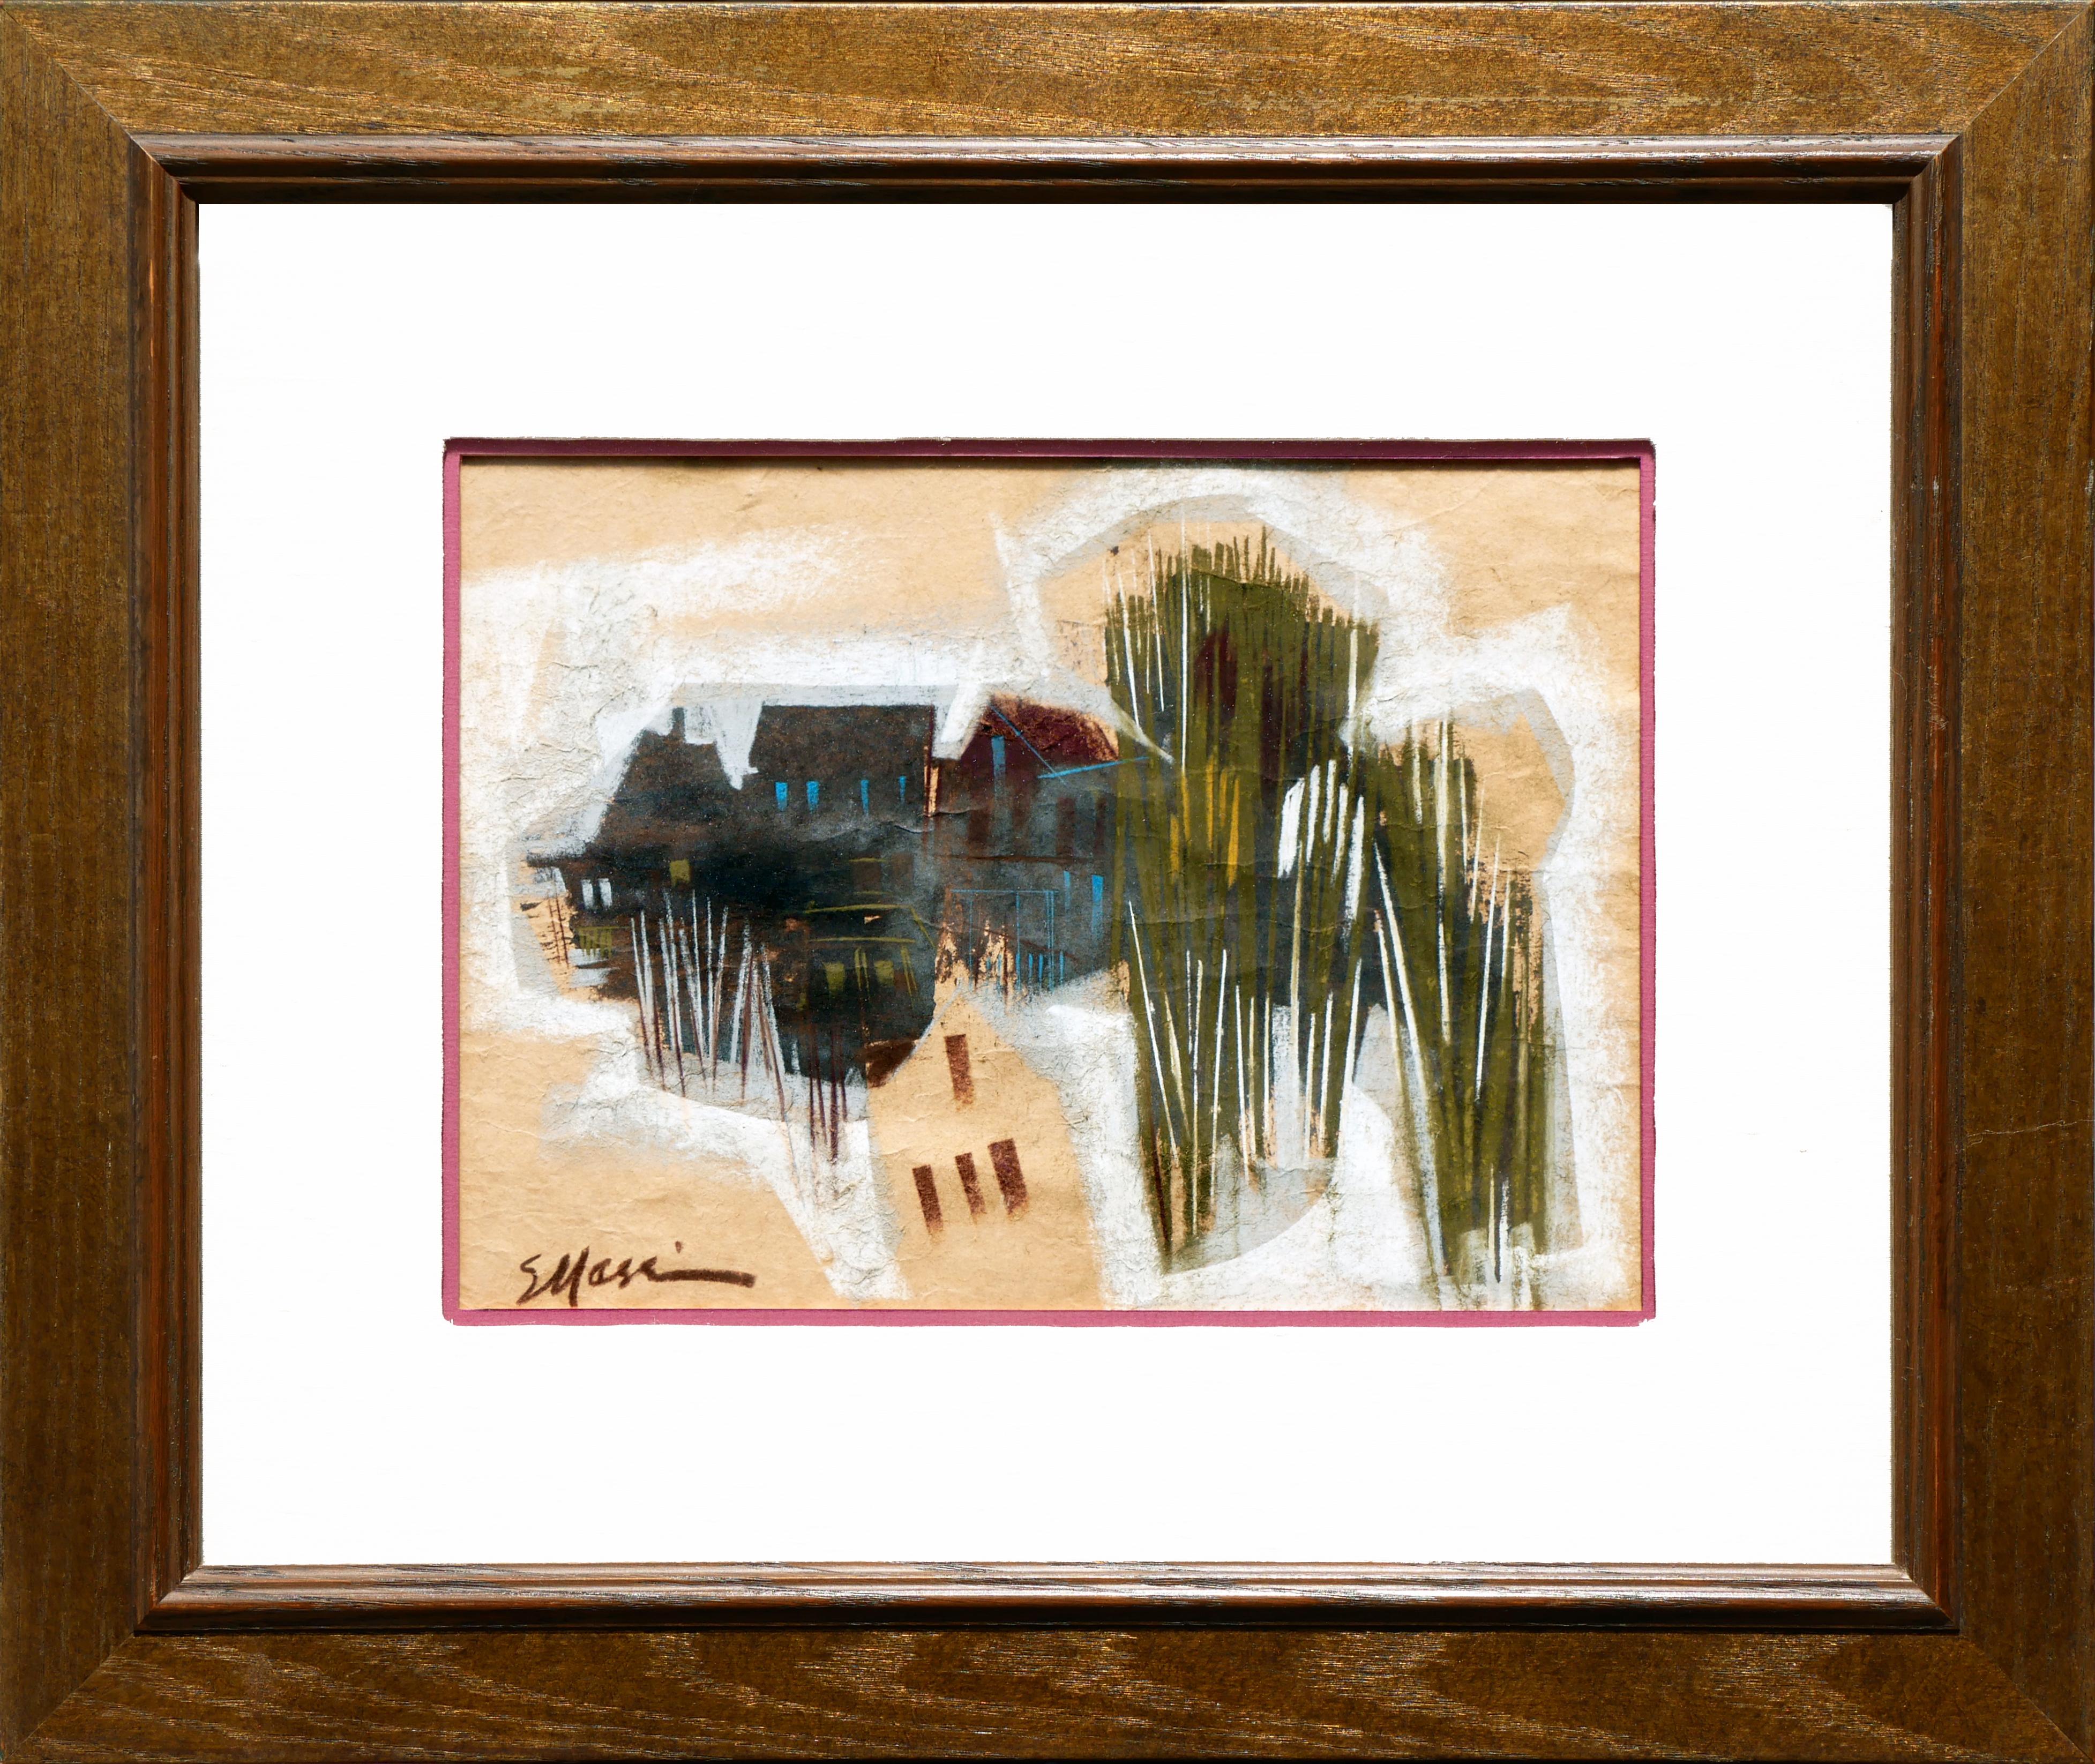 Eugene Massin Abstract Drawing - Dark Toned Modern Abstract Angular Landscape Drawing of a Small City or Village